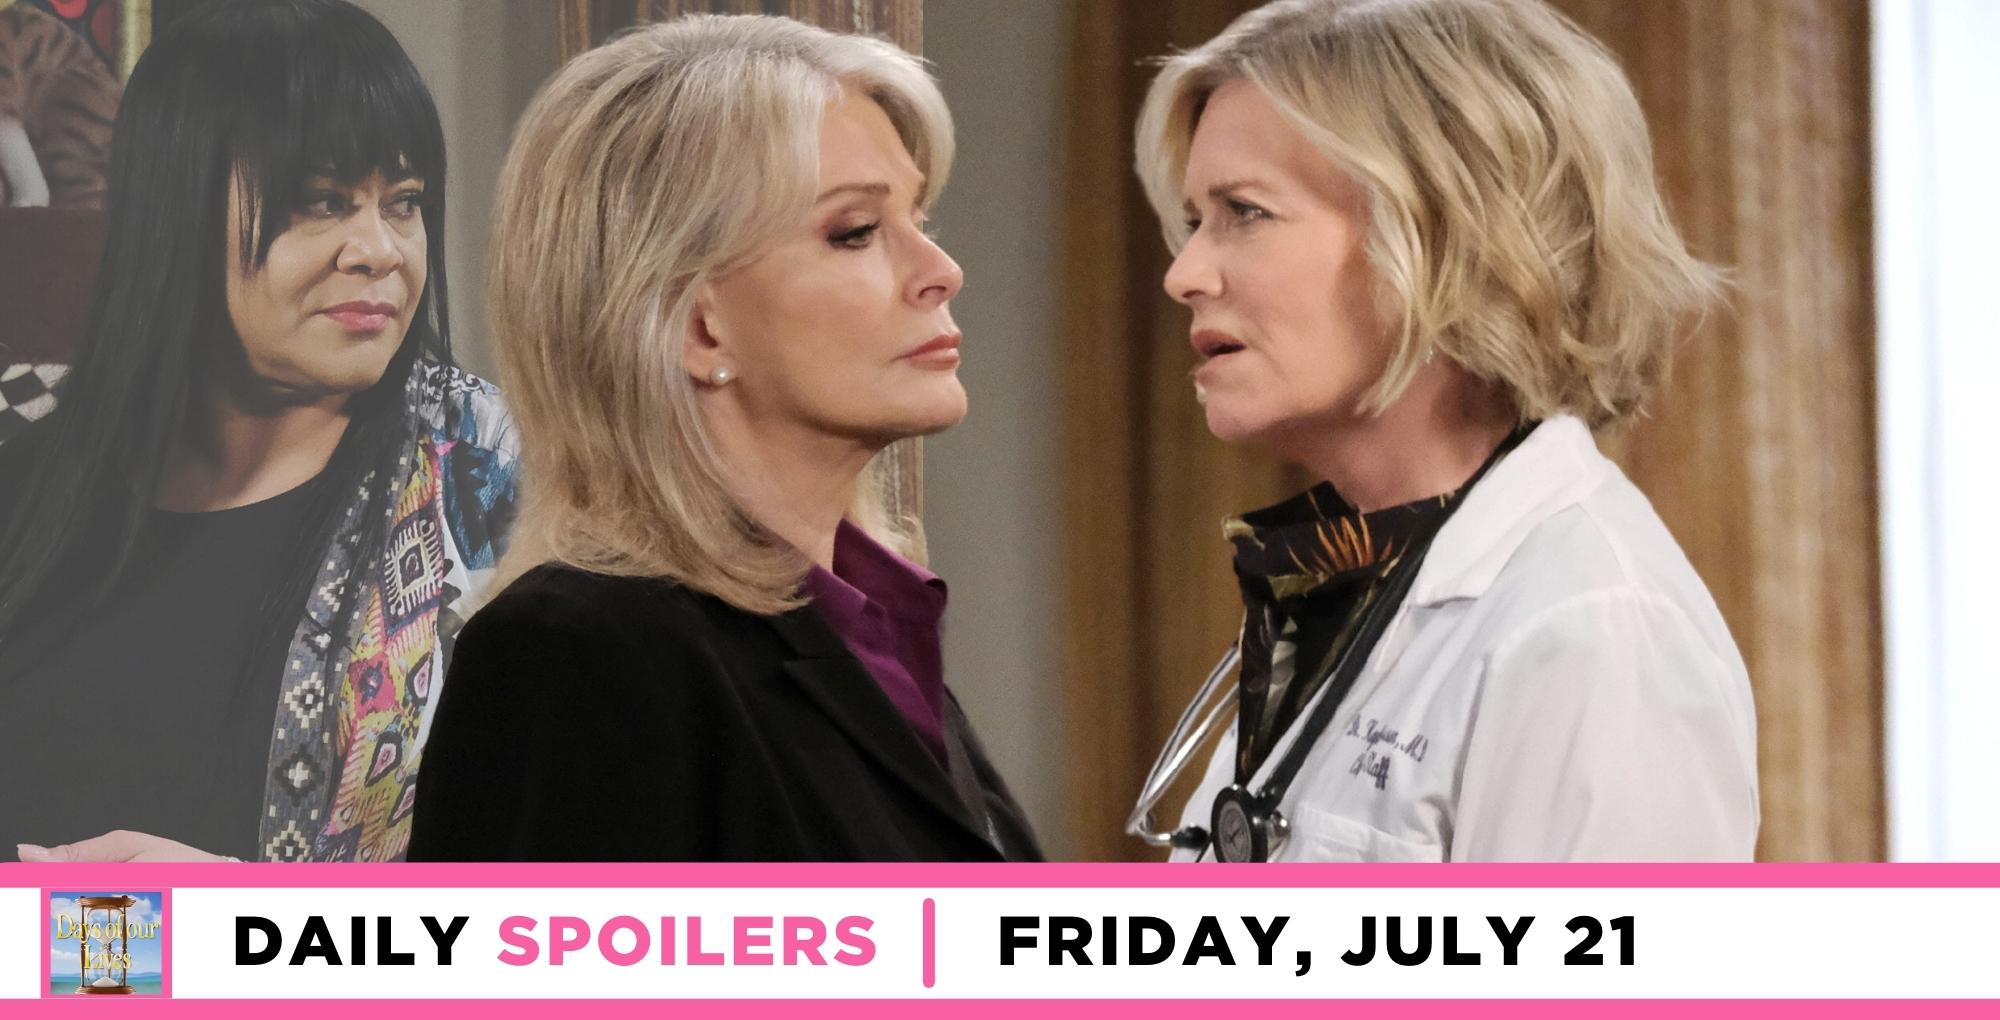 days of our lives spoilers for july 21, 2023, has marlena talking about whitley to kayla.